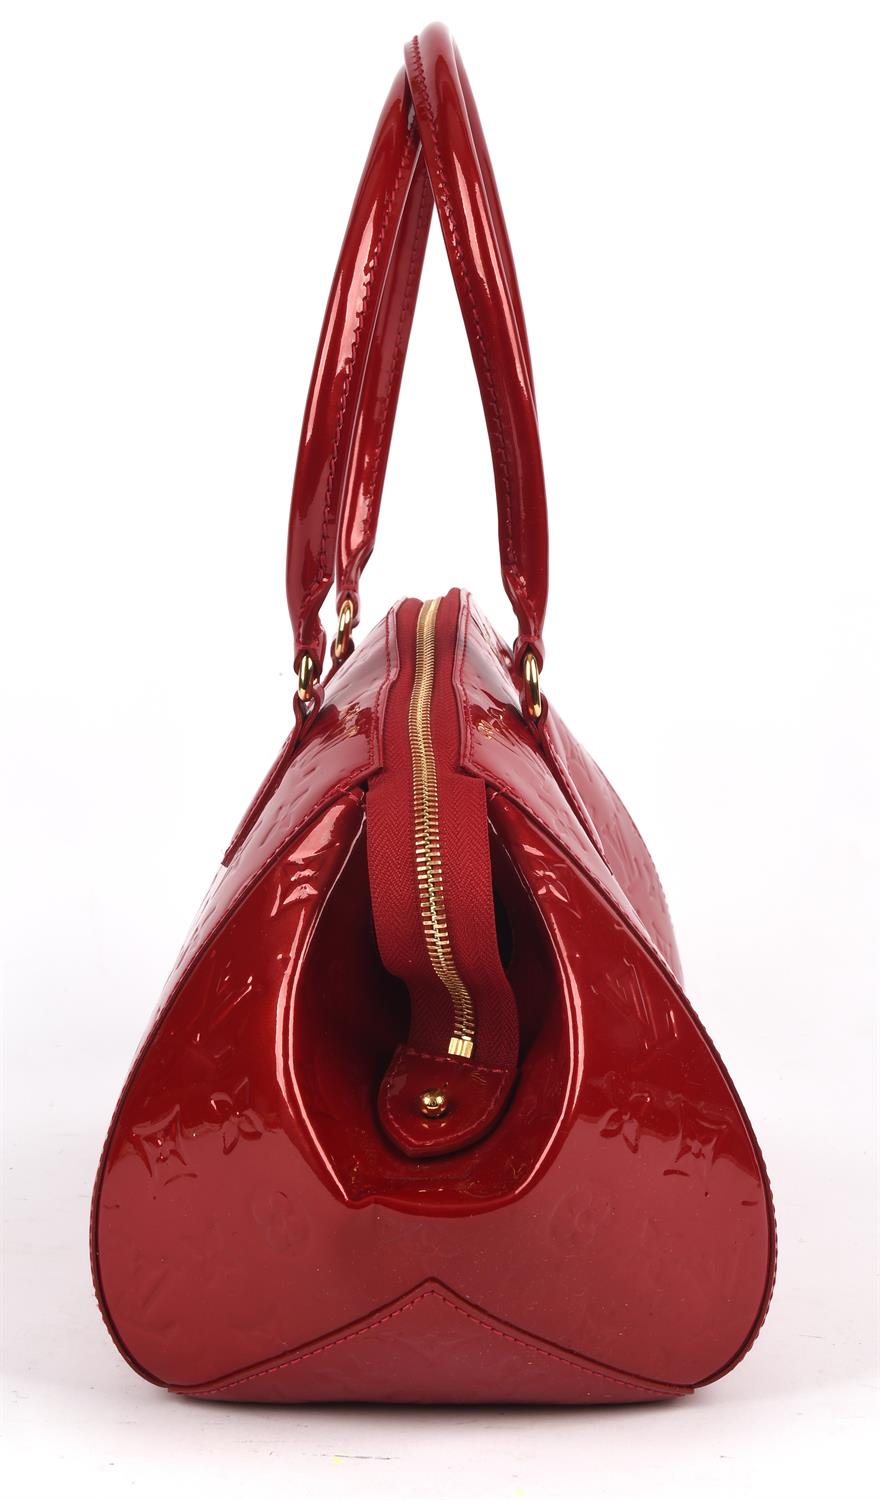 LOUIS VUITTON lipstick red Vernis varnished leather French Montana handbag with gold coloured - Image 5 of 8